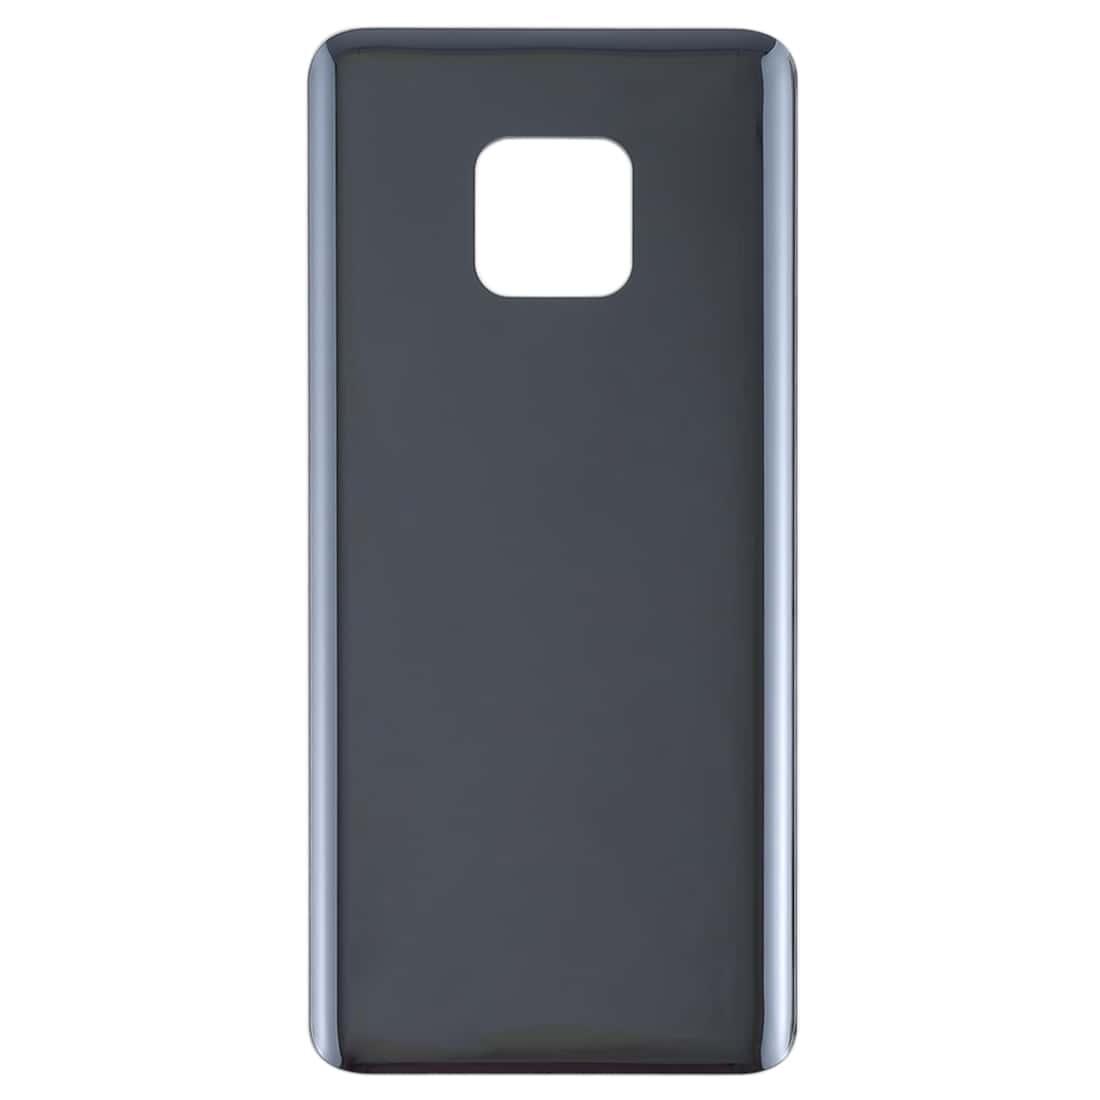 Back Glass Panel for  Huawei Mate 20 Pro Black